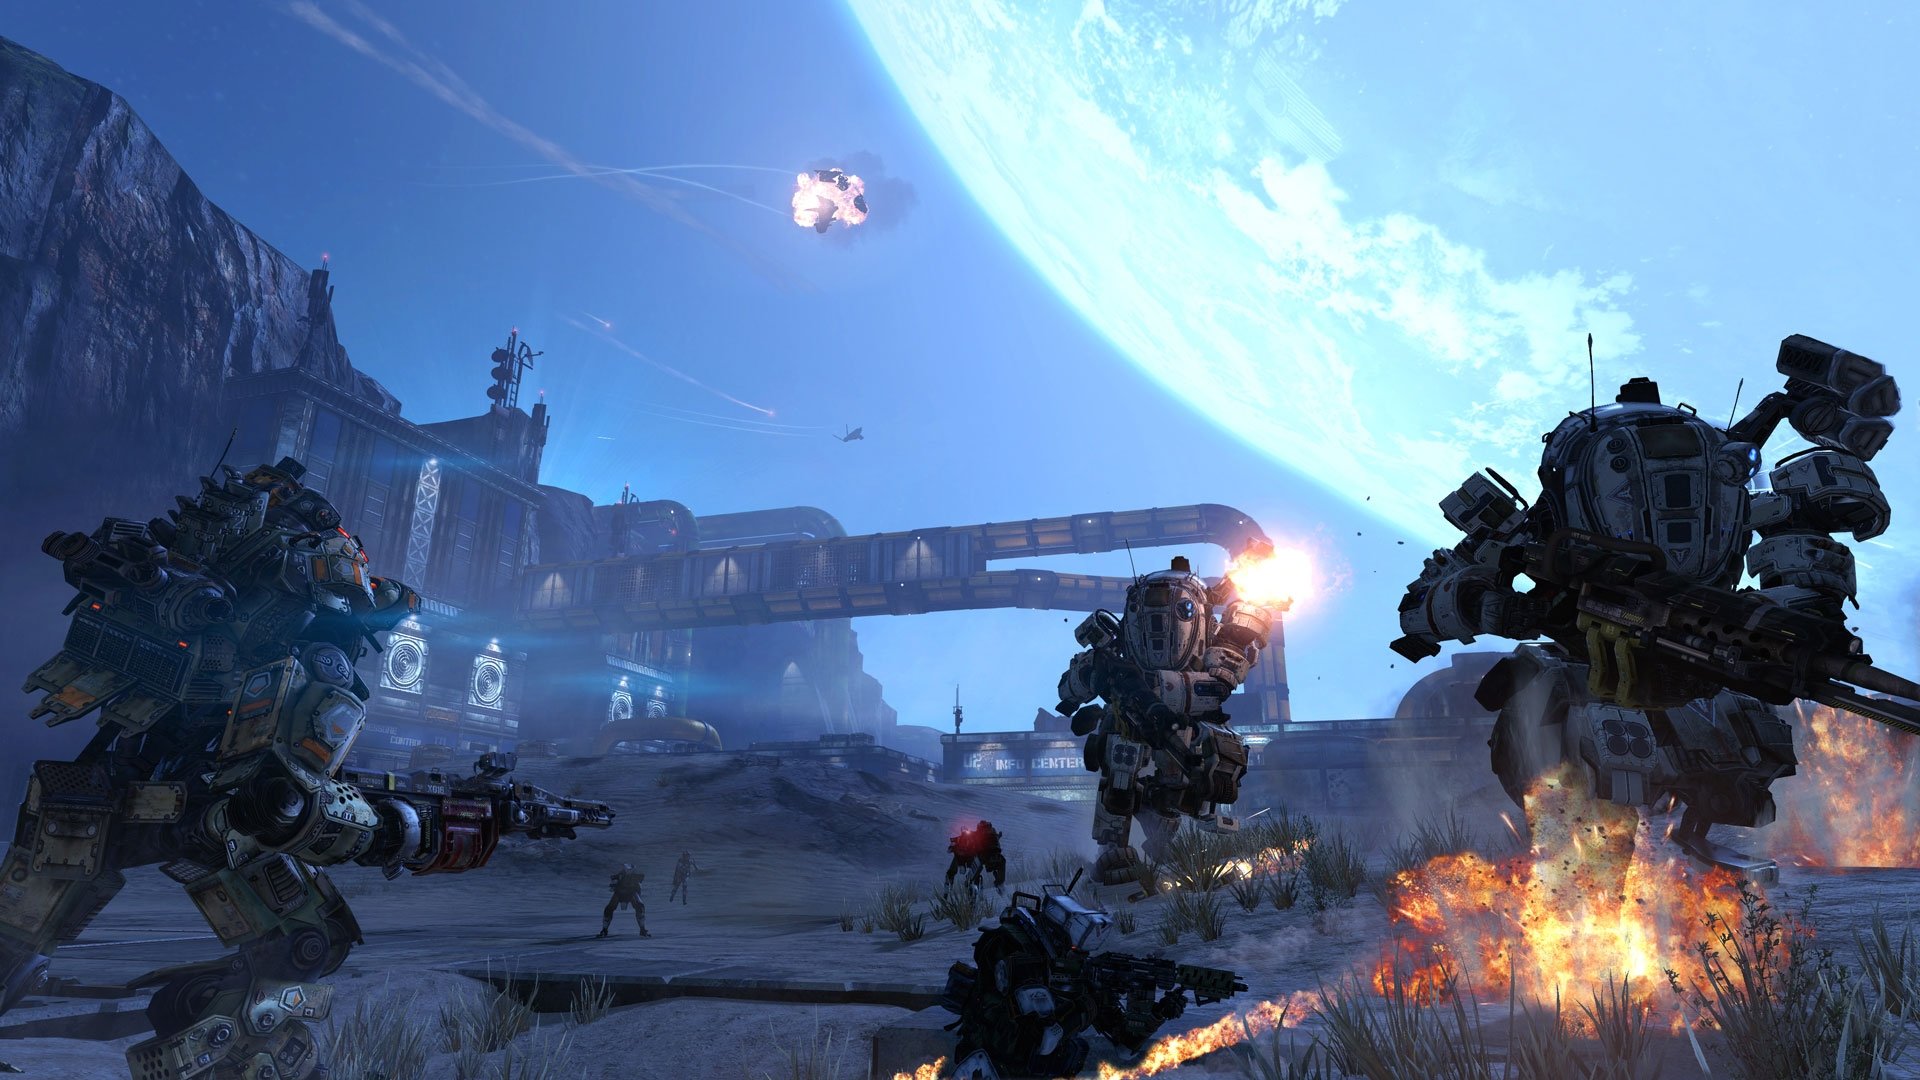 Download hd 1920x1080 Titanfall desktop background ID:127091 for free